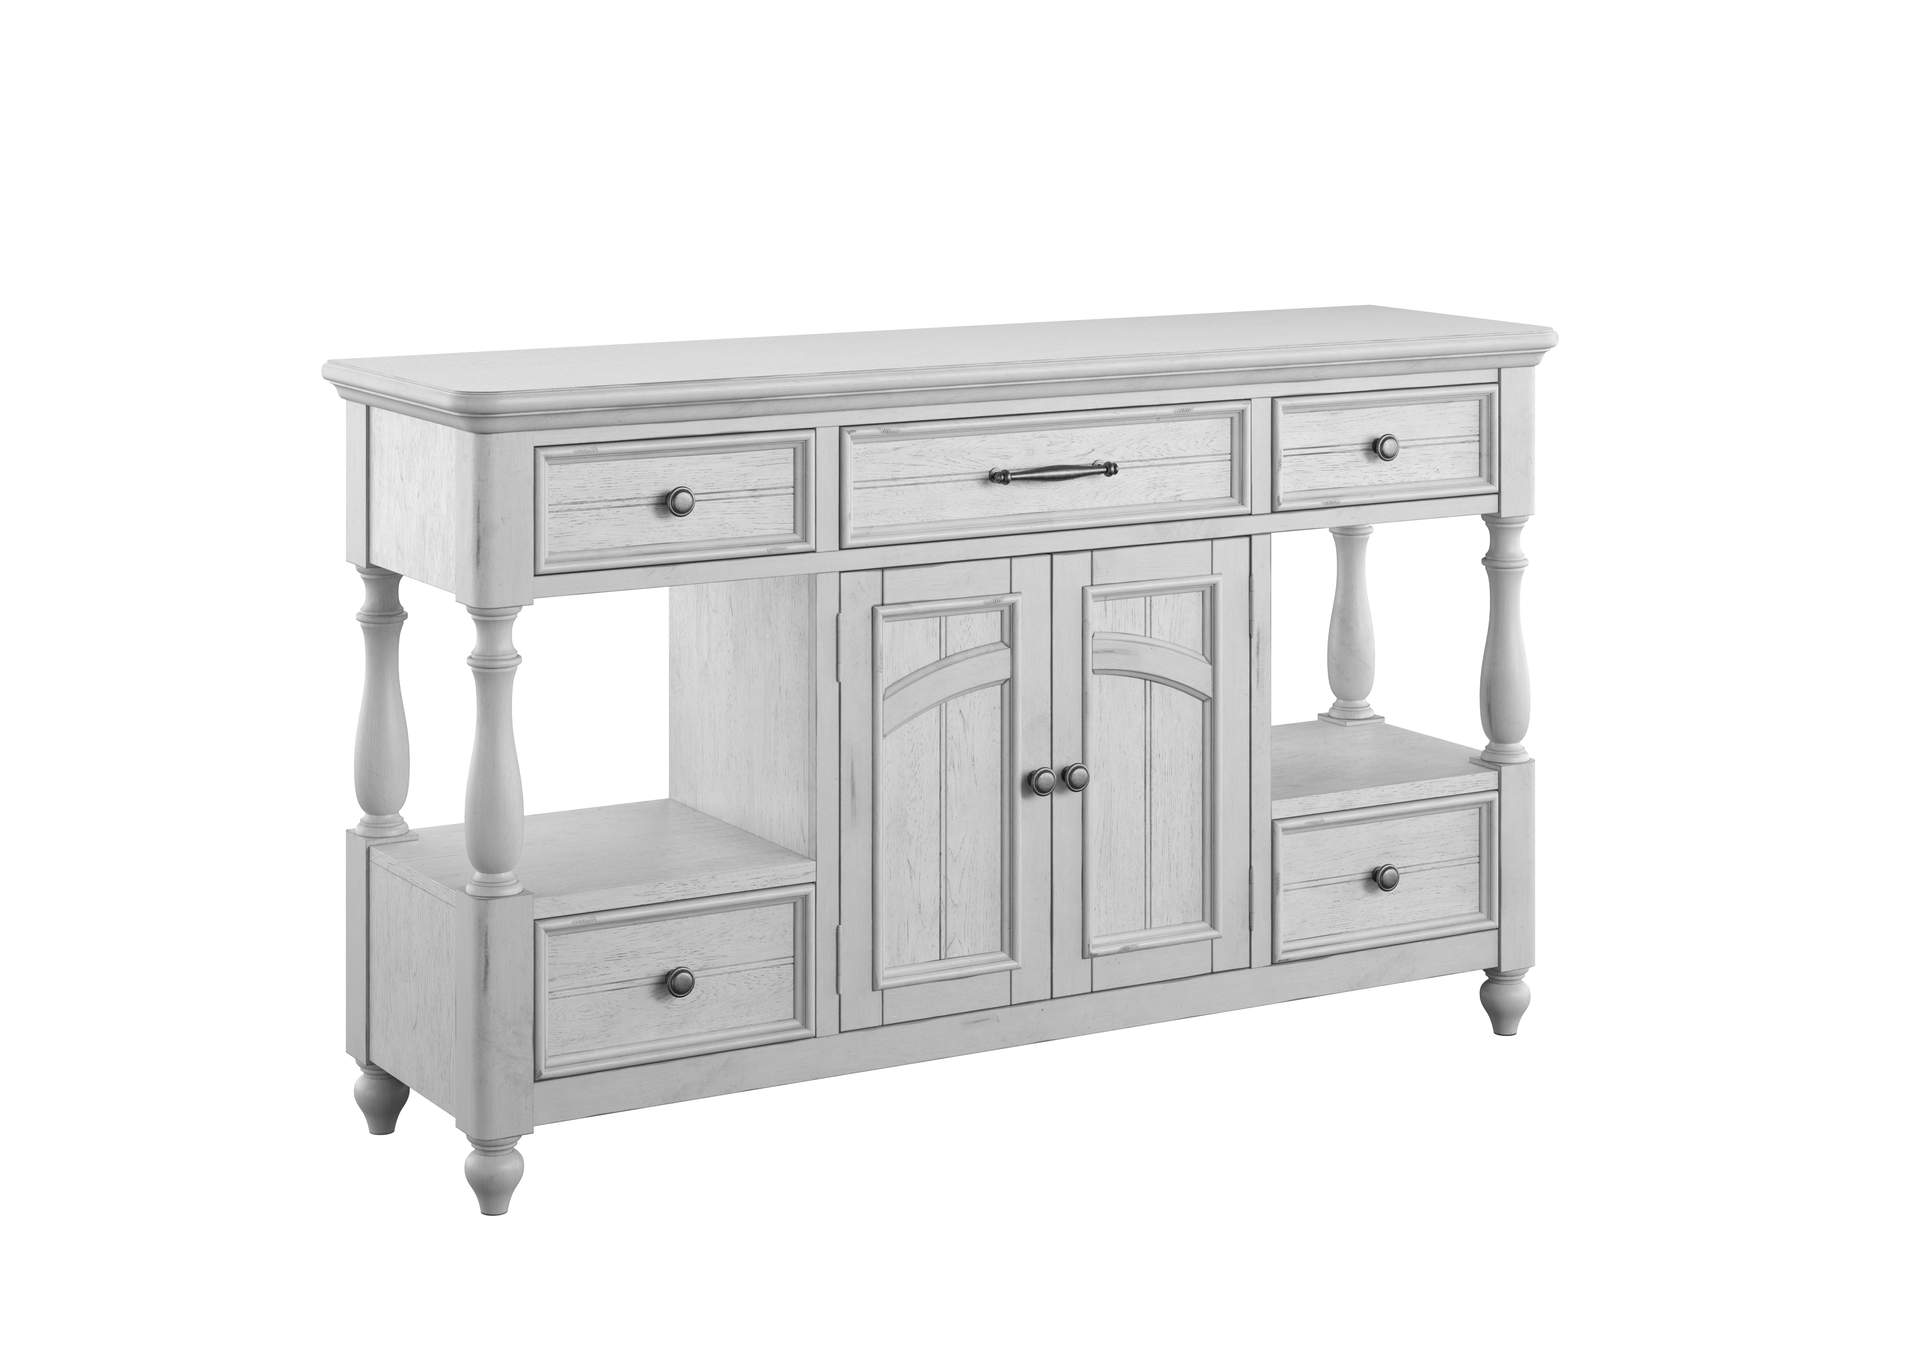 New Haven Server,Emerald Home Furnishings